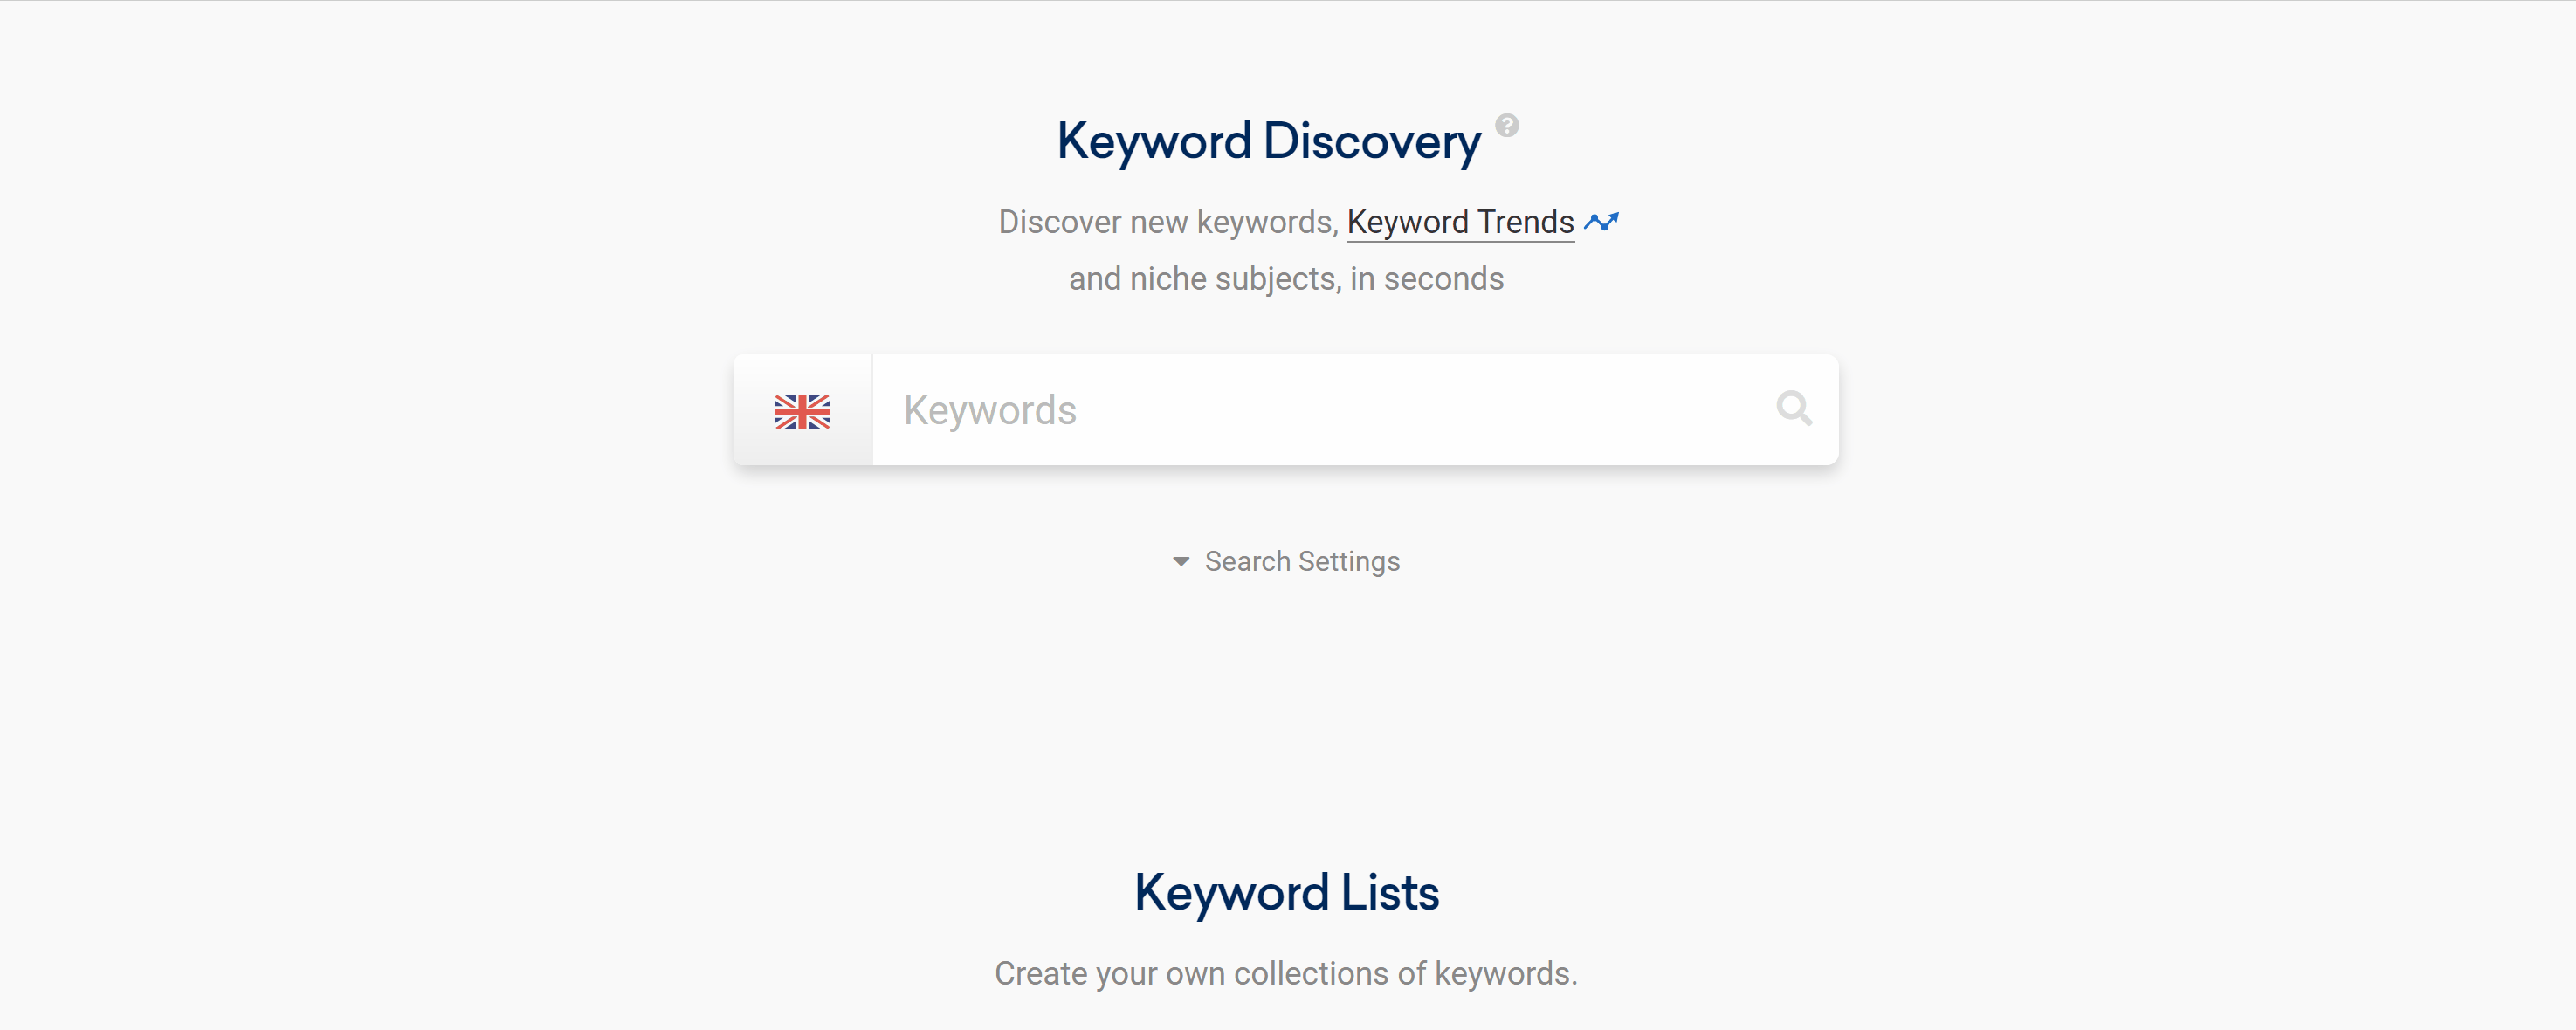 Keyword Trends section